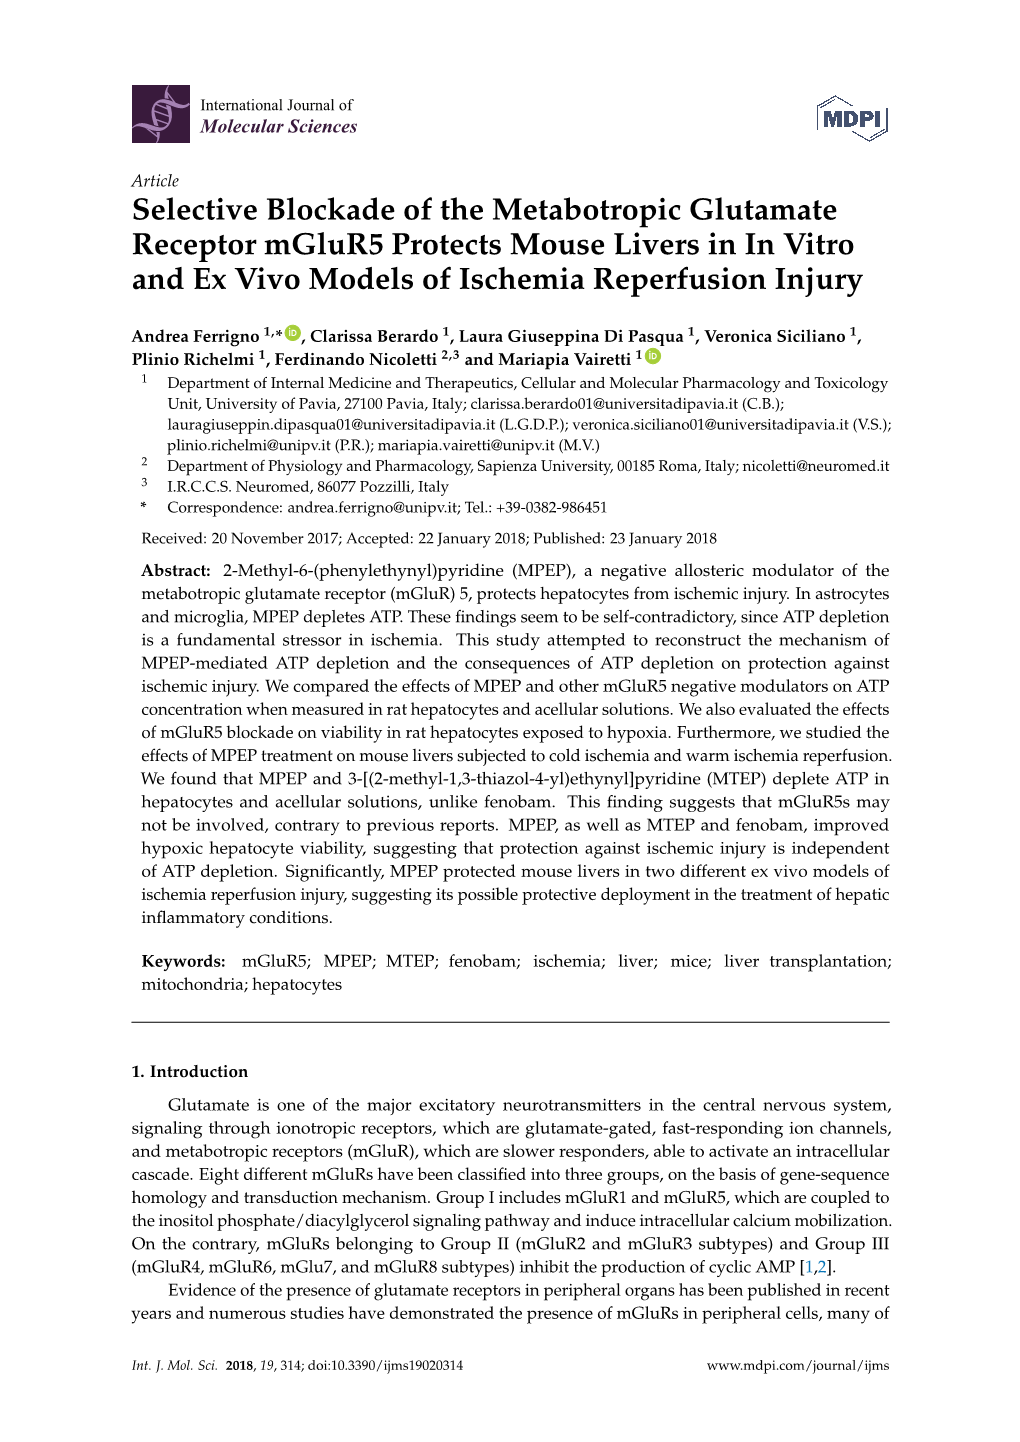 Selective Blockade of the Metabotropic Glutamate Receptor Mglur5 Protects Mouse Livers in in Vitro and Ex Vivo Models of Ischemia Reperfusion Injury